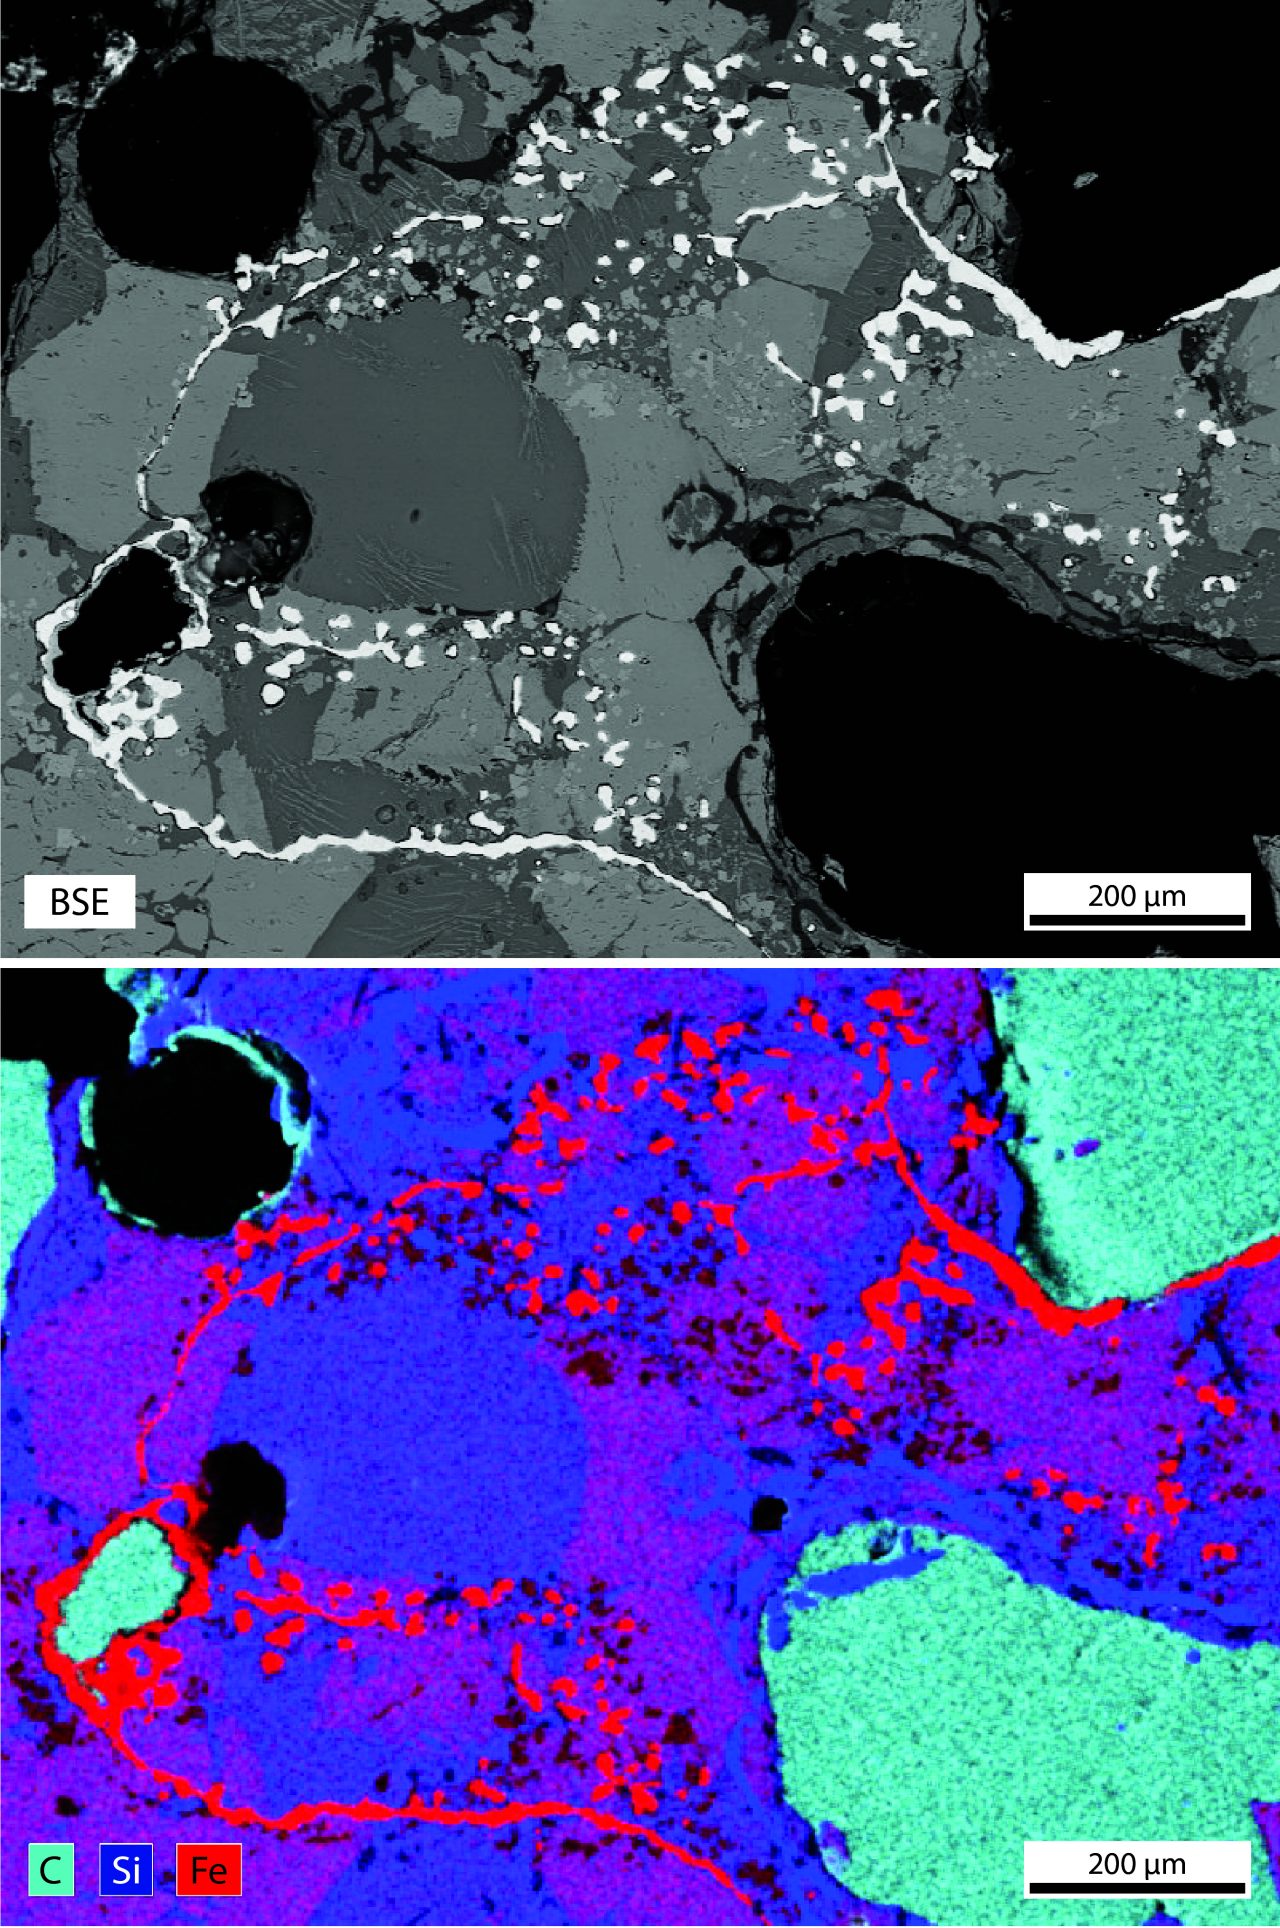 An example of a furnace ceramic generated in an experiment to reproduce conditions used for iron smelting. The bright areas in the upper image correlate with high iron contents (red in the lower image), and show infiltration of molten metal into the vessel walls. 